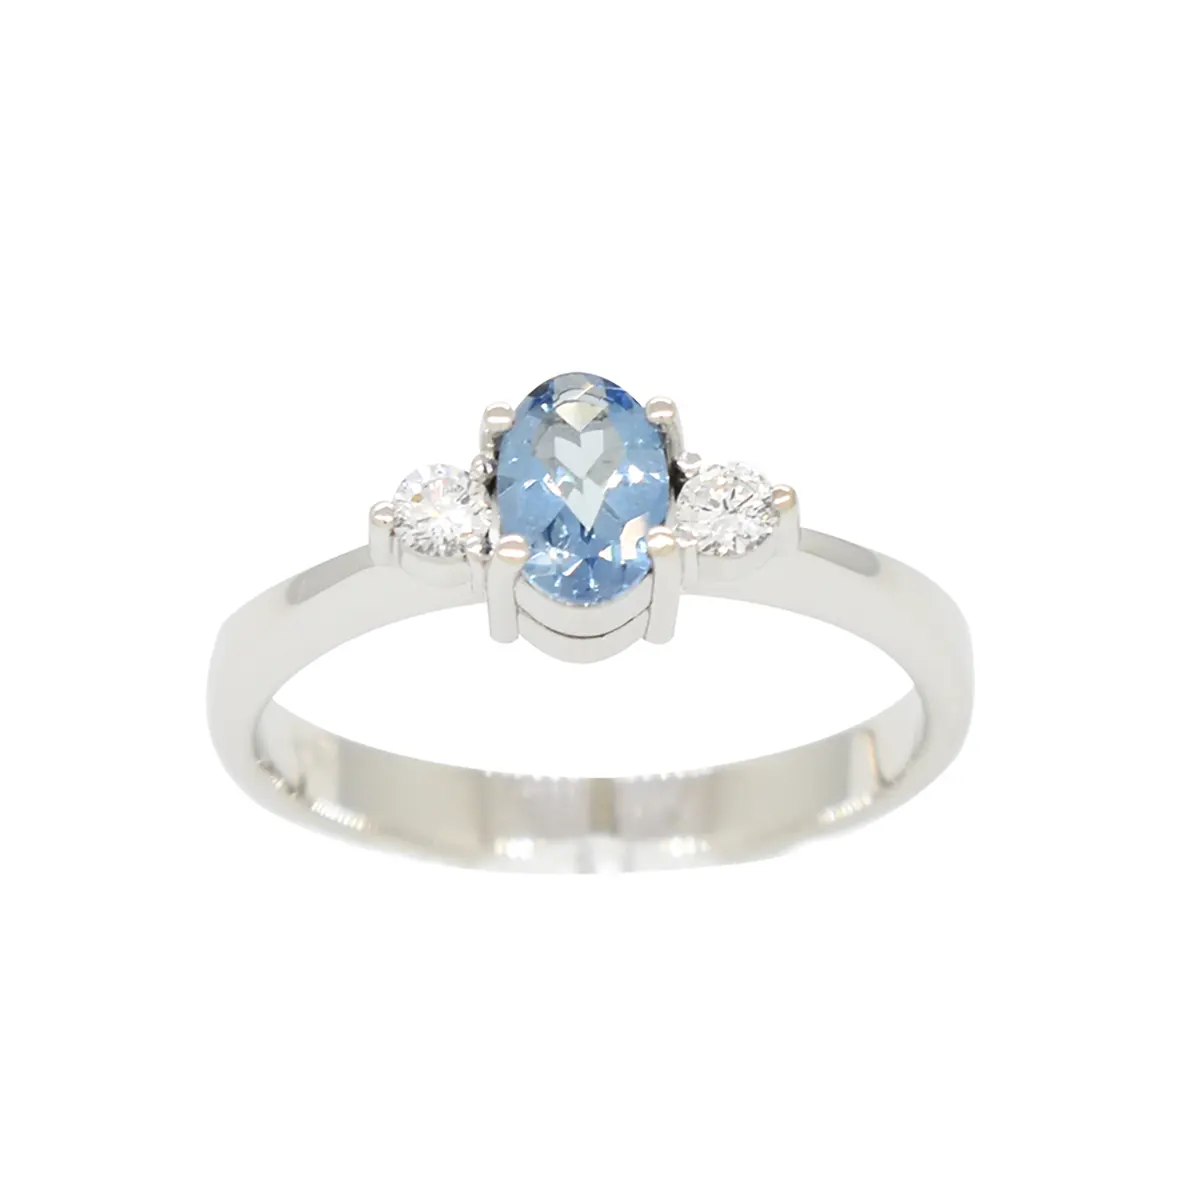 3-stones-ring-with-oval-shape-aquamarine-and-brilliant-cut-diamonds-in-white-gold